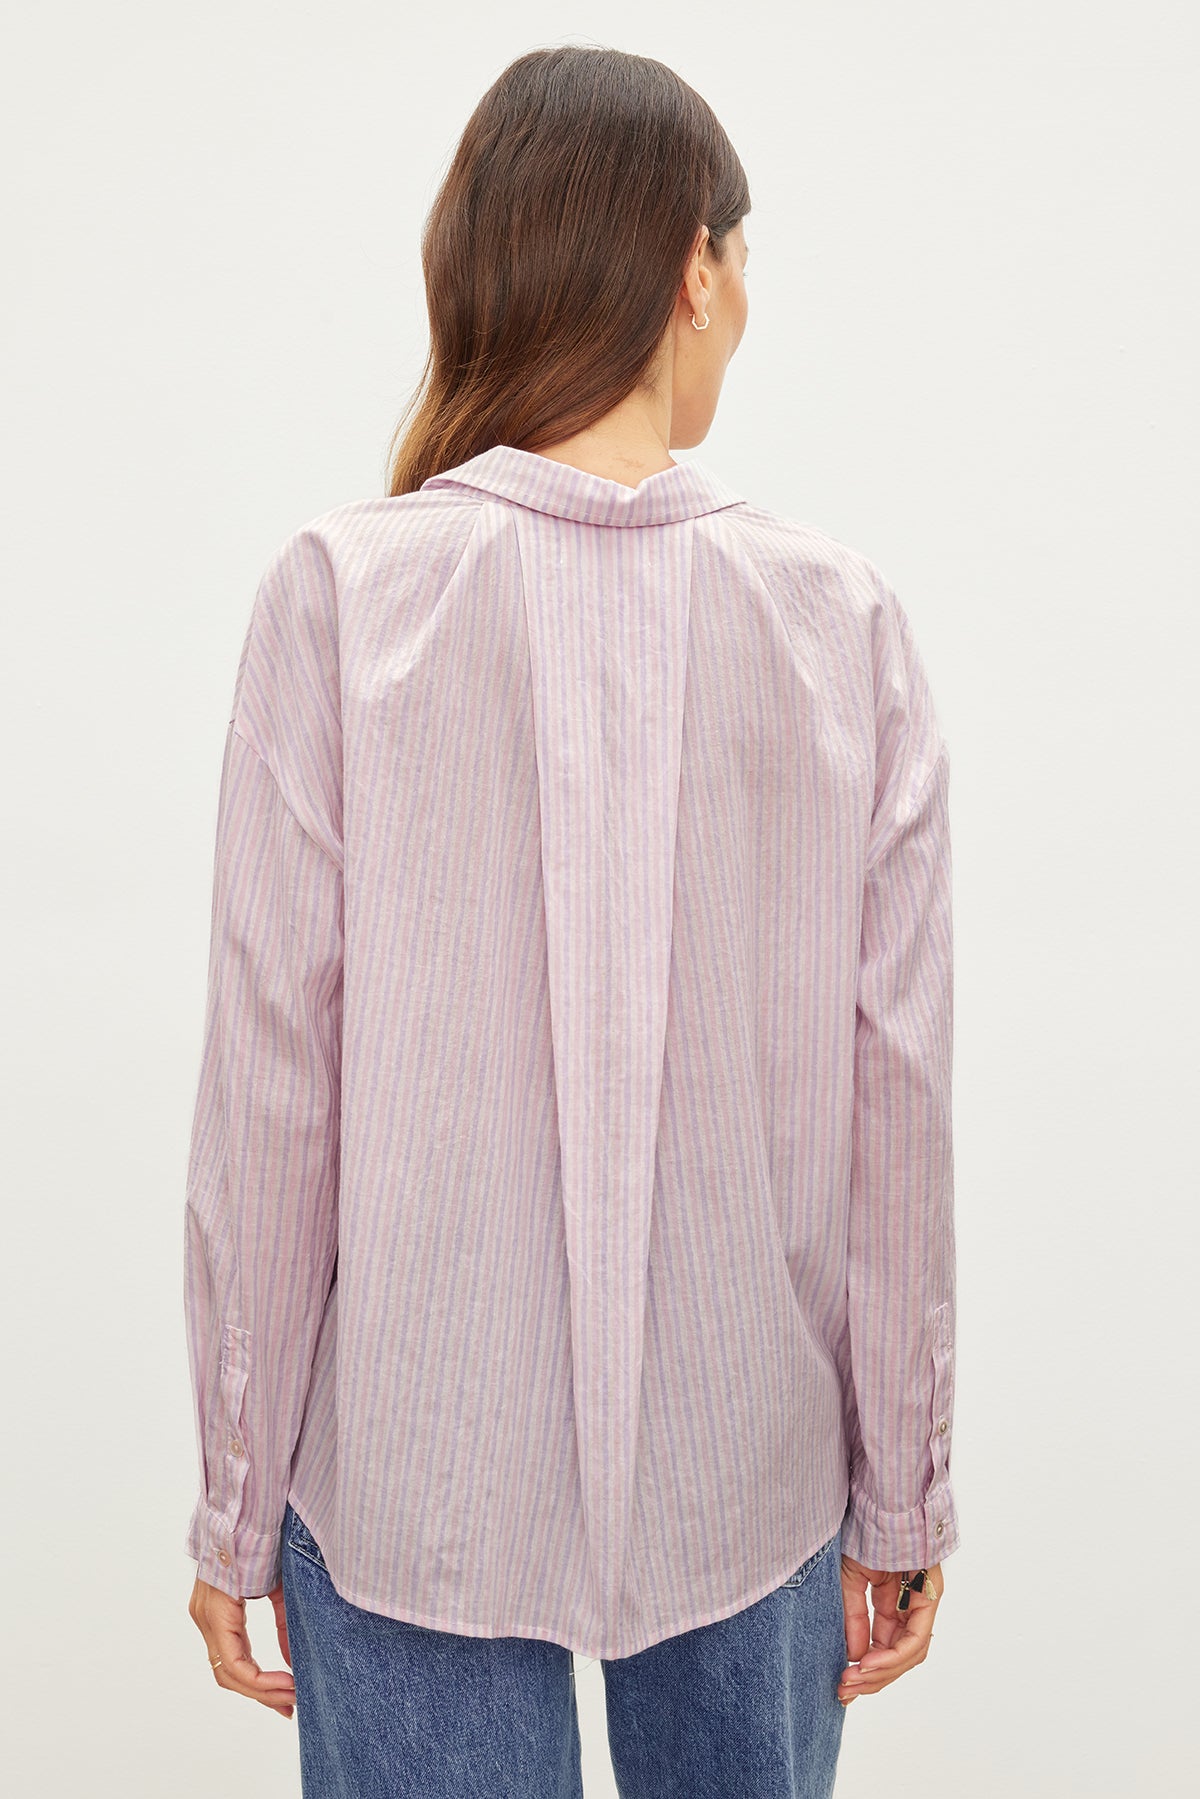   The back view of a woman wearing Velvet by Graham & Spencer's ASHLYN STRIPED BUTTON-UP SHIRT, a wardrobe staple. 